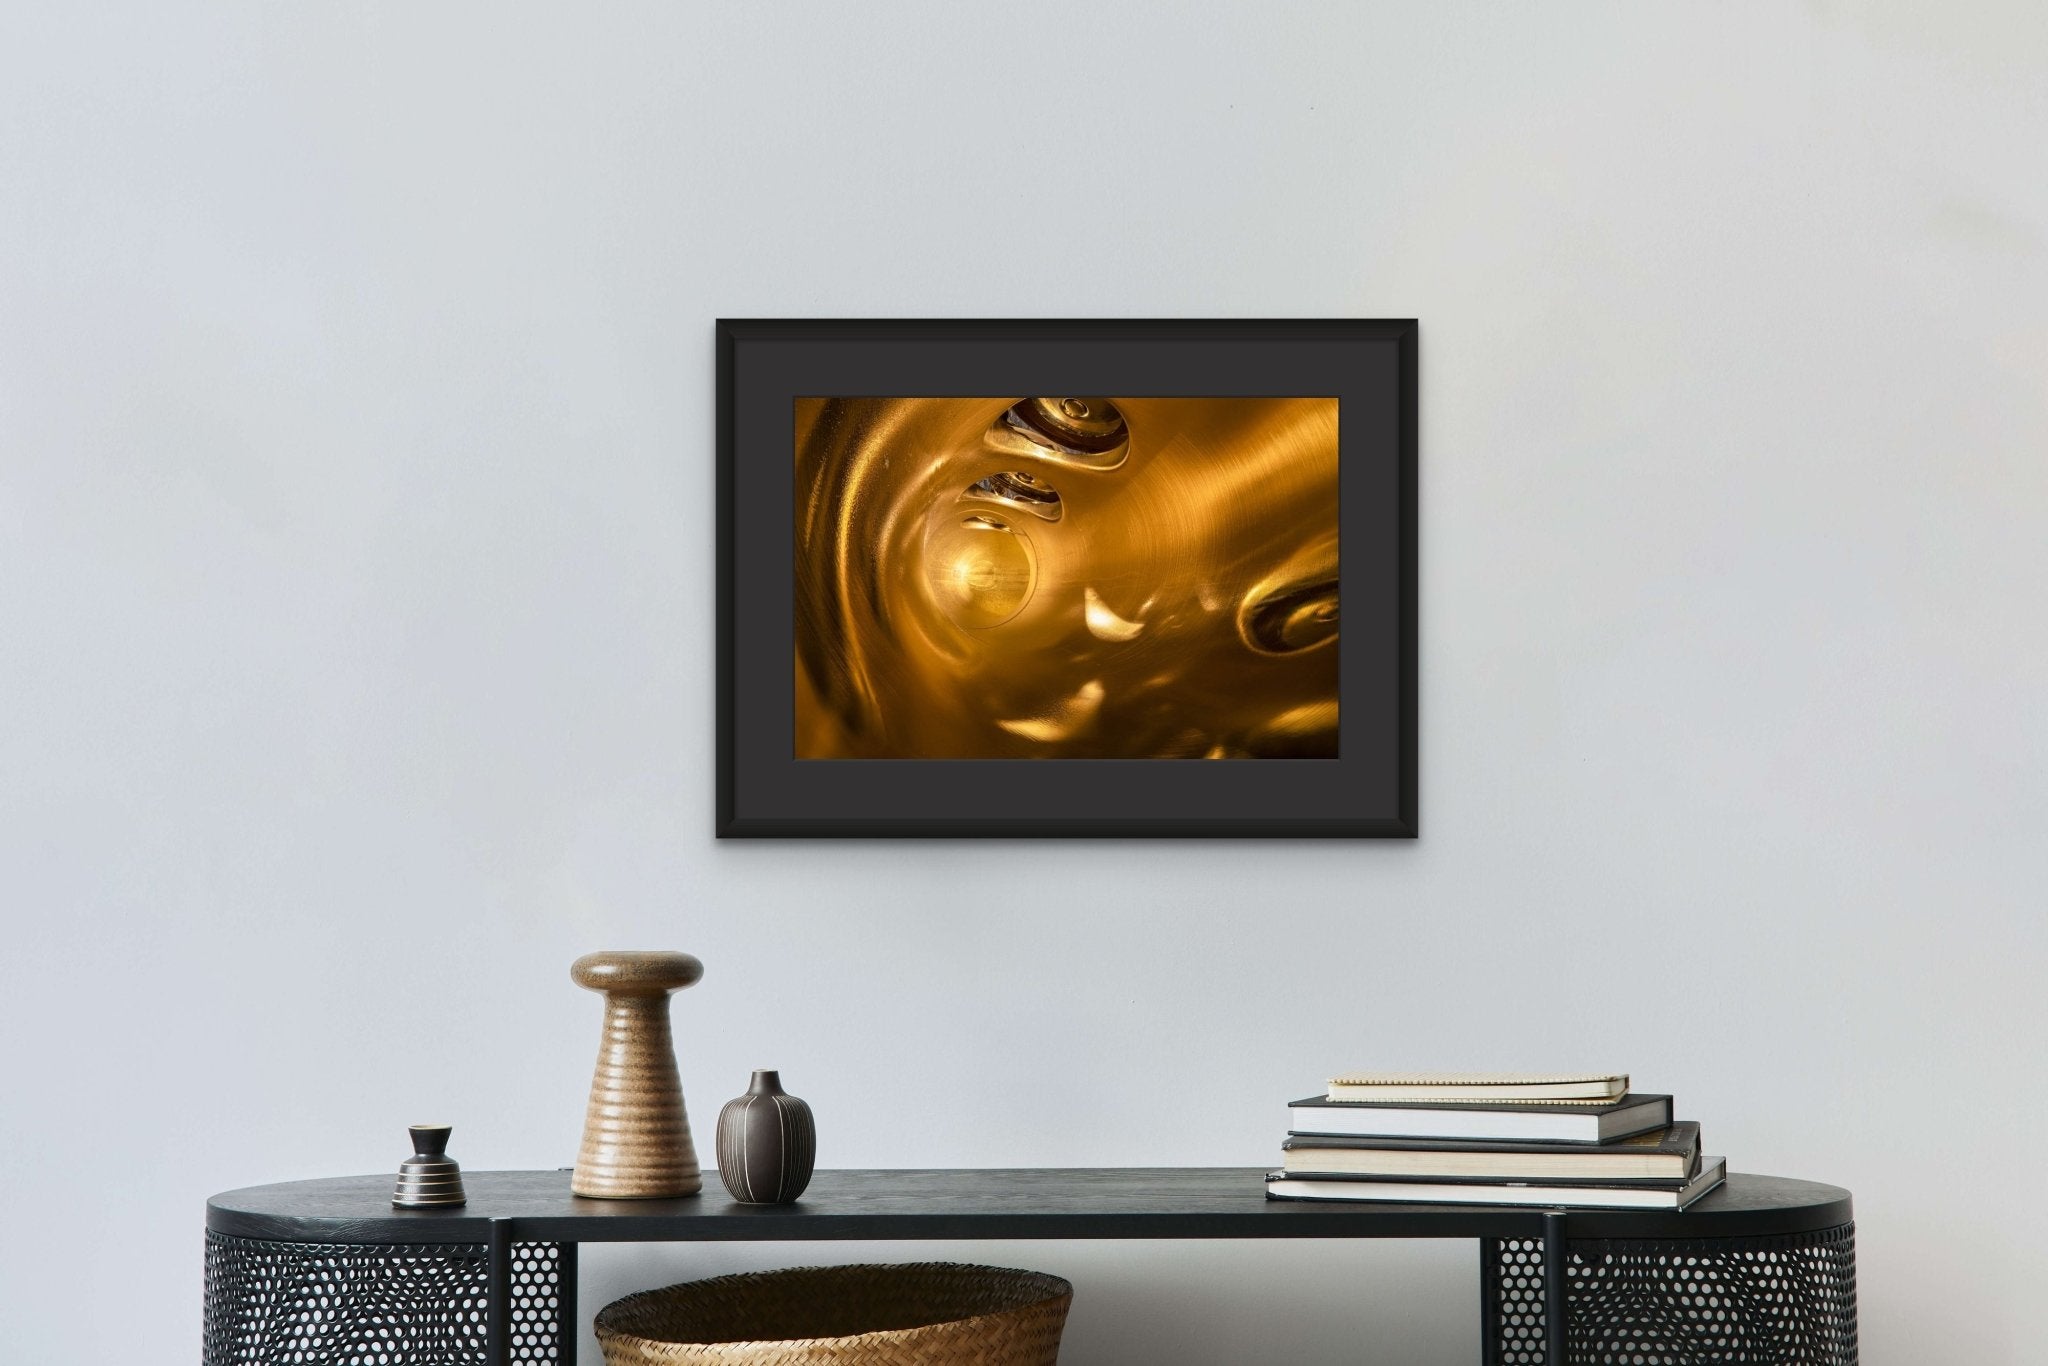 Photo of 2021 Selmer Saxophone. Signed Limited Edition Museum Quality Print. - Giclée Museum Quality Print - Architecture In Music